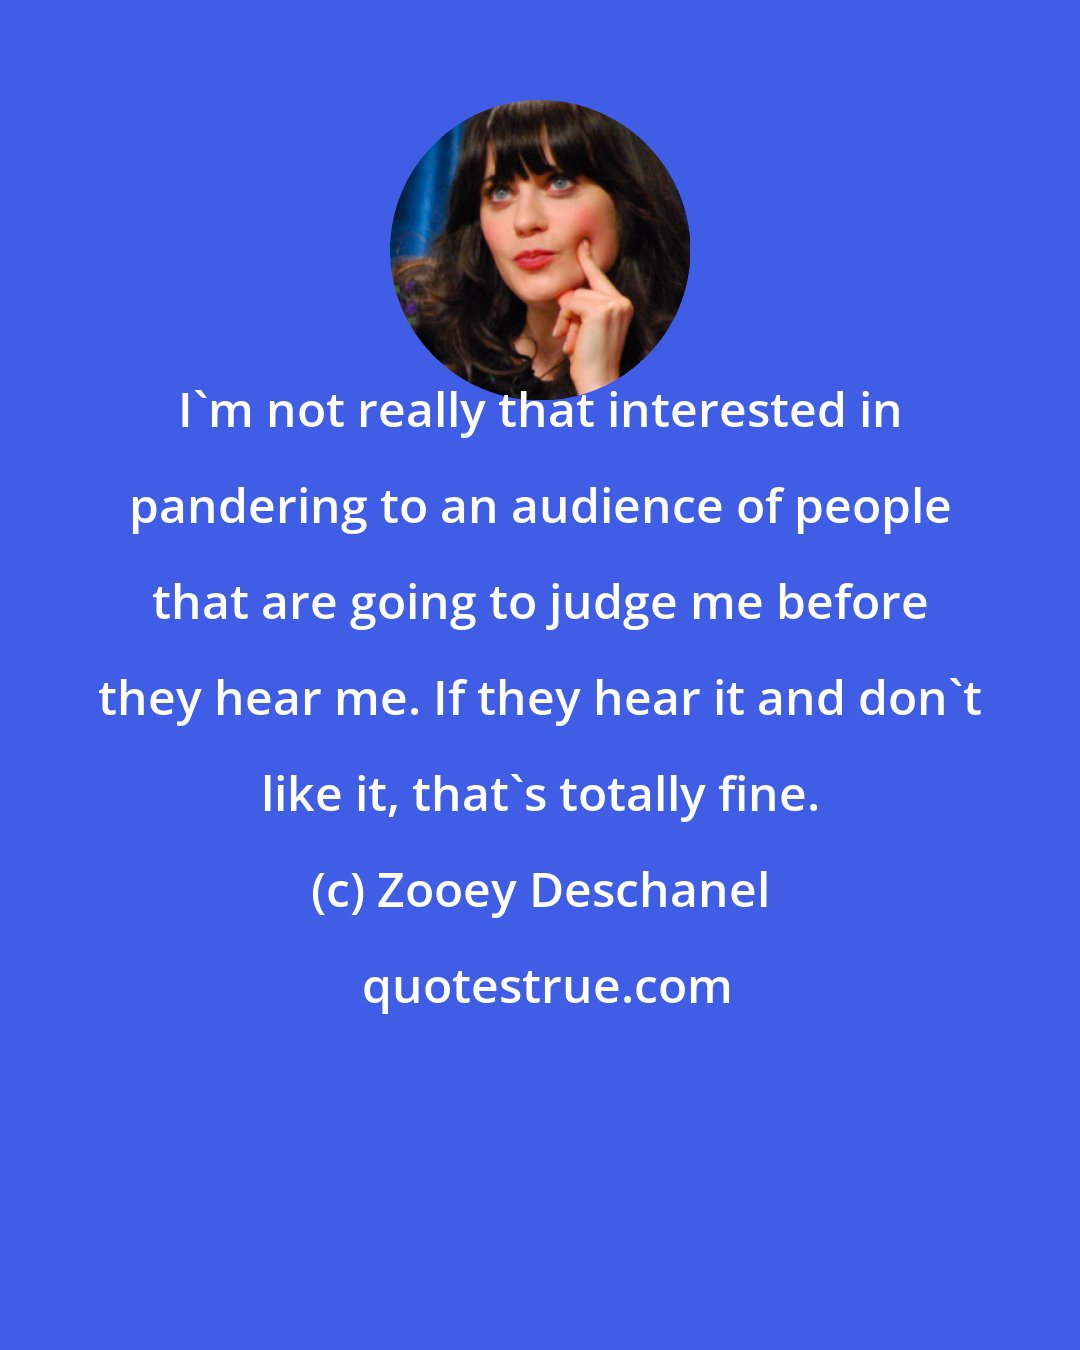 Zooey Deschanel: I'm not really that interested in pandering to an audience of people that are going to judge me before they hear me. If they hear it and don't like it, that's totally fine.